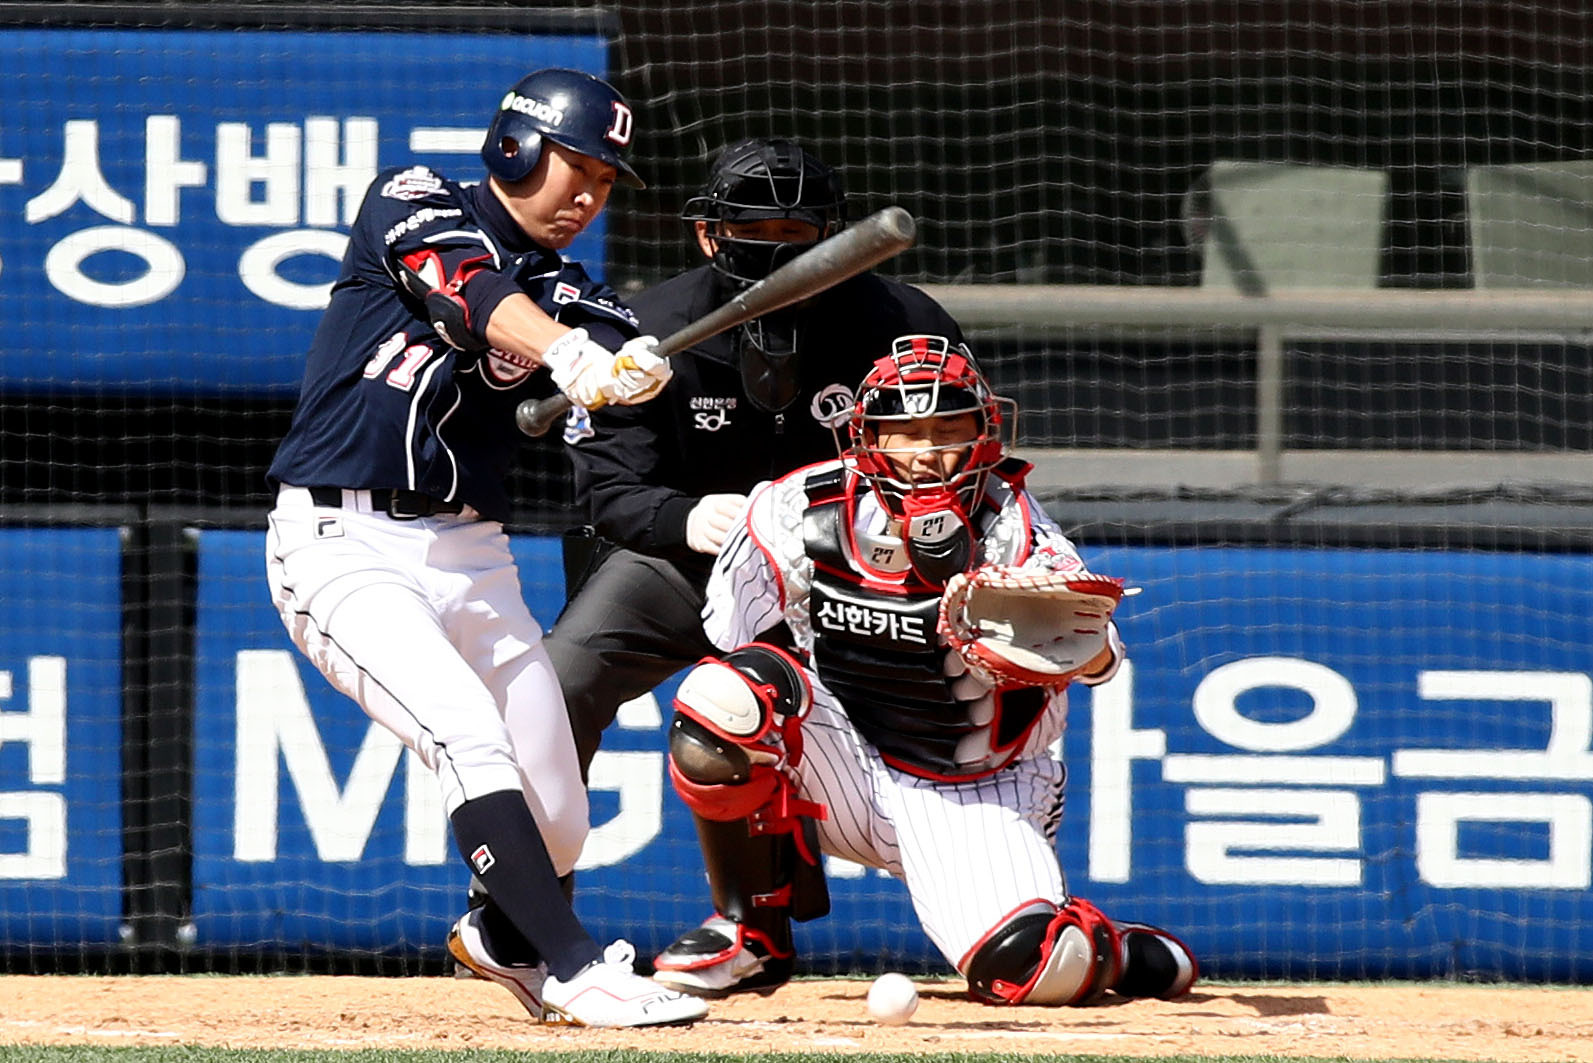 KBO on ESPN schedule, how to watch, teams for the Korea baseball league and  more - ESPN